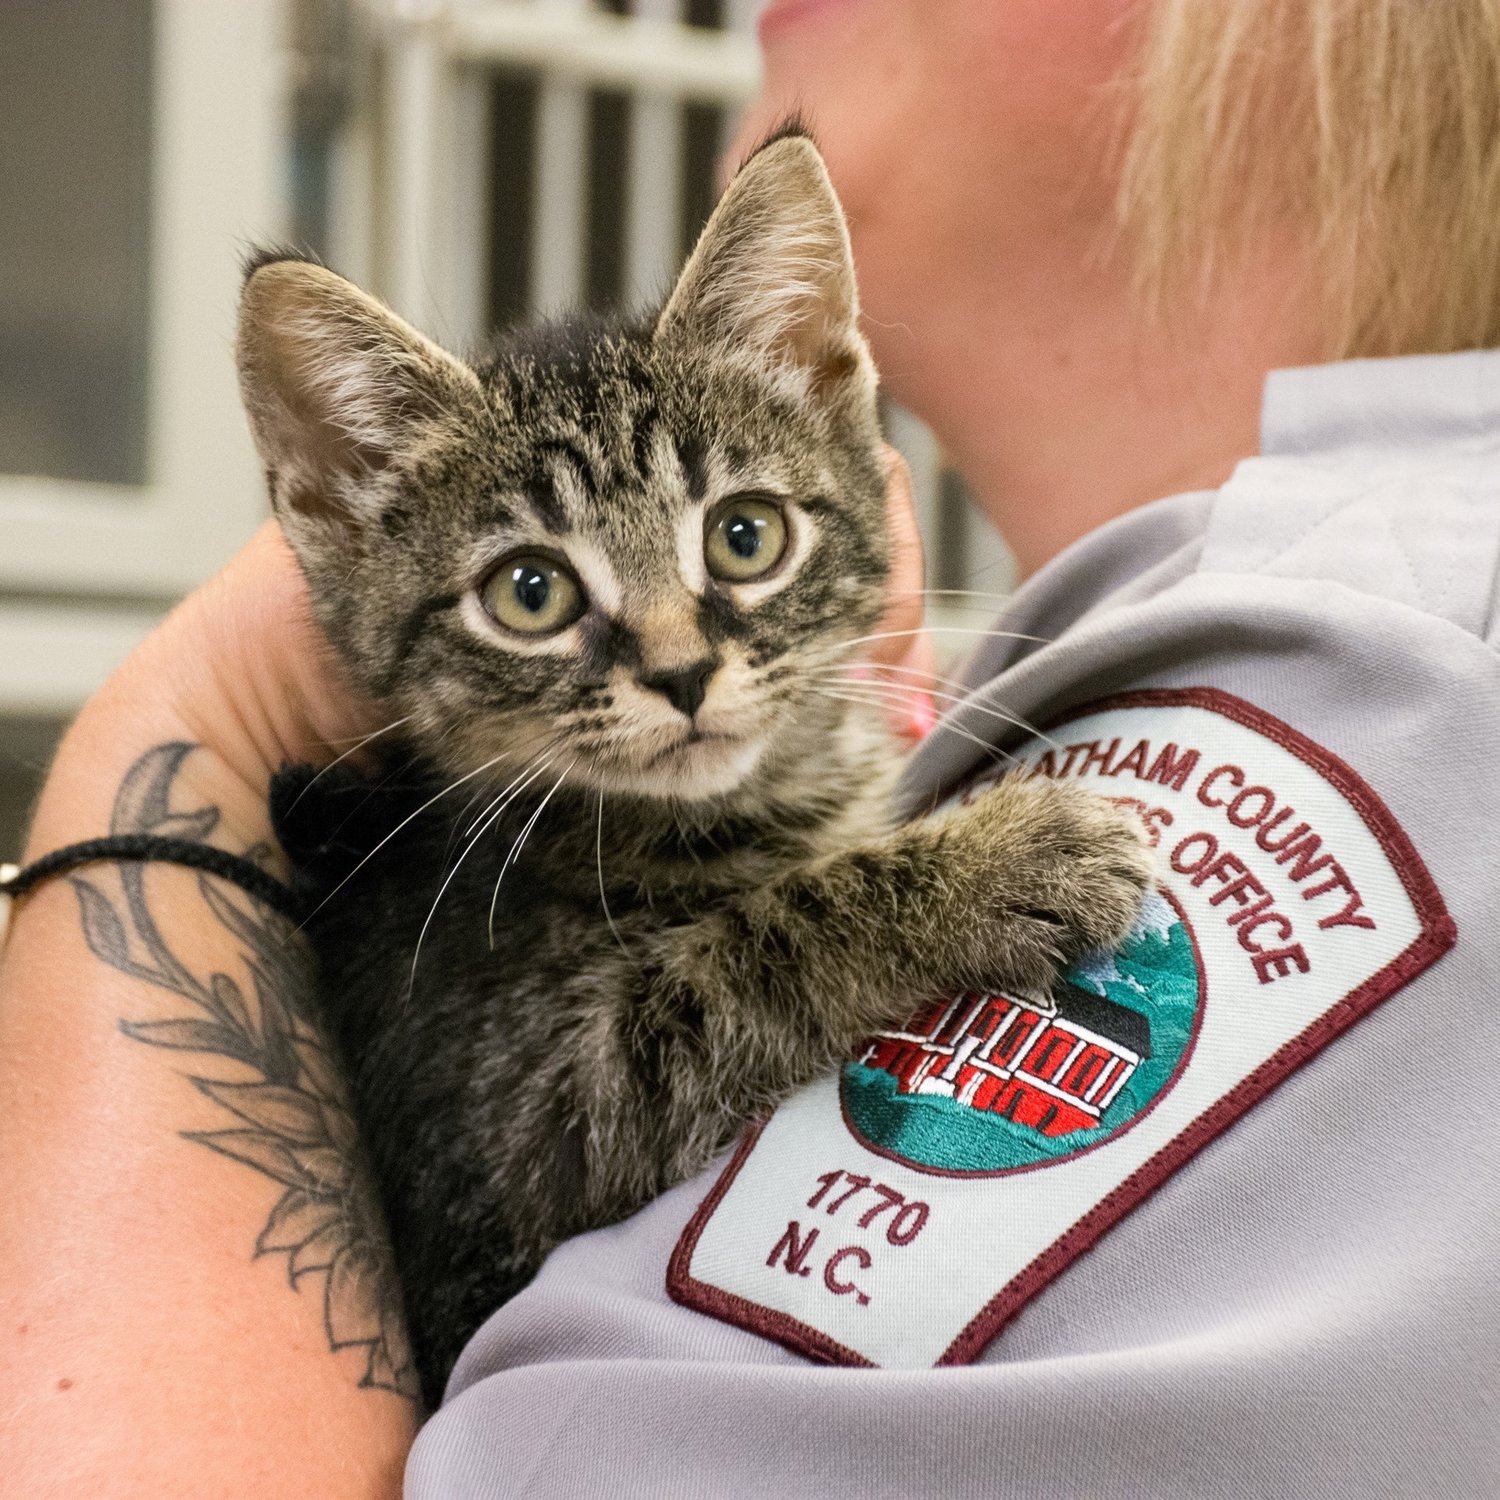 How the Chatham County Animal Shelter Has Fared Since Sheriff’s Office Transition